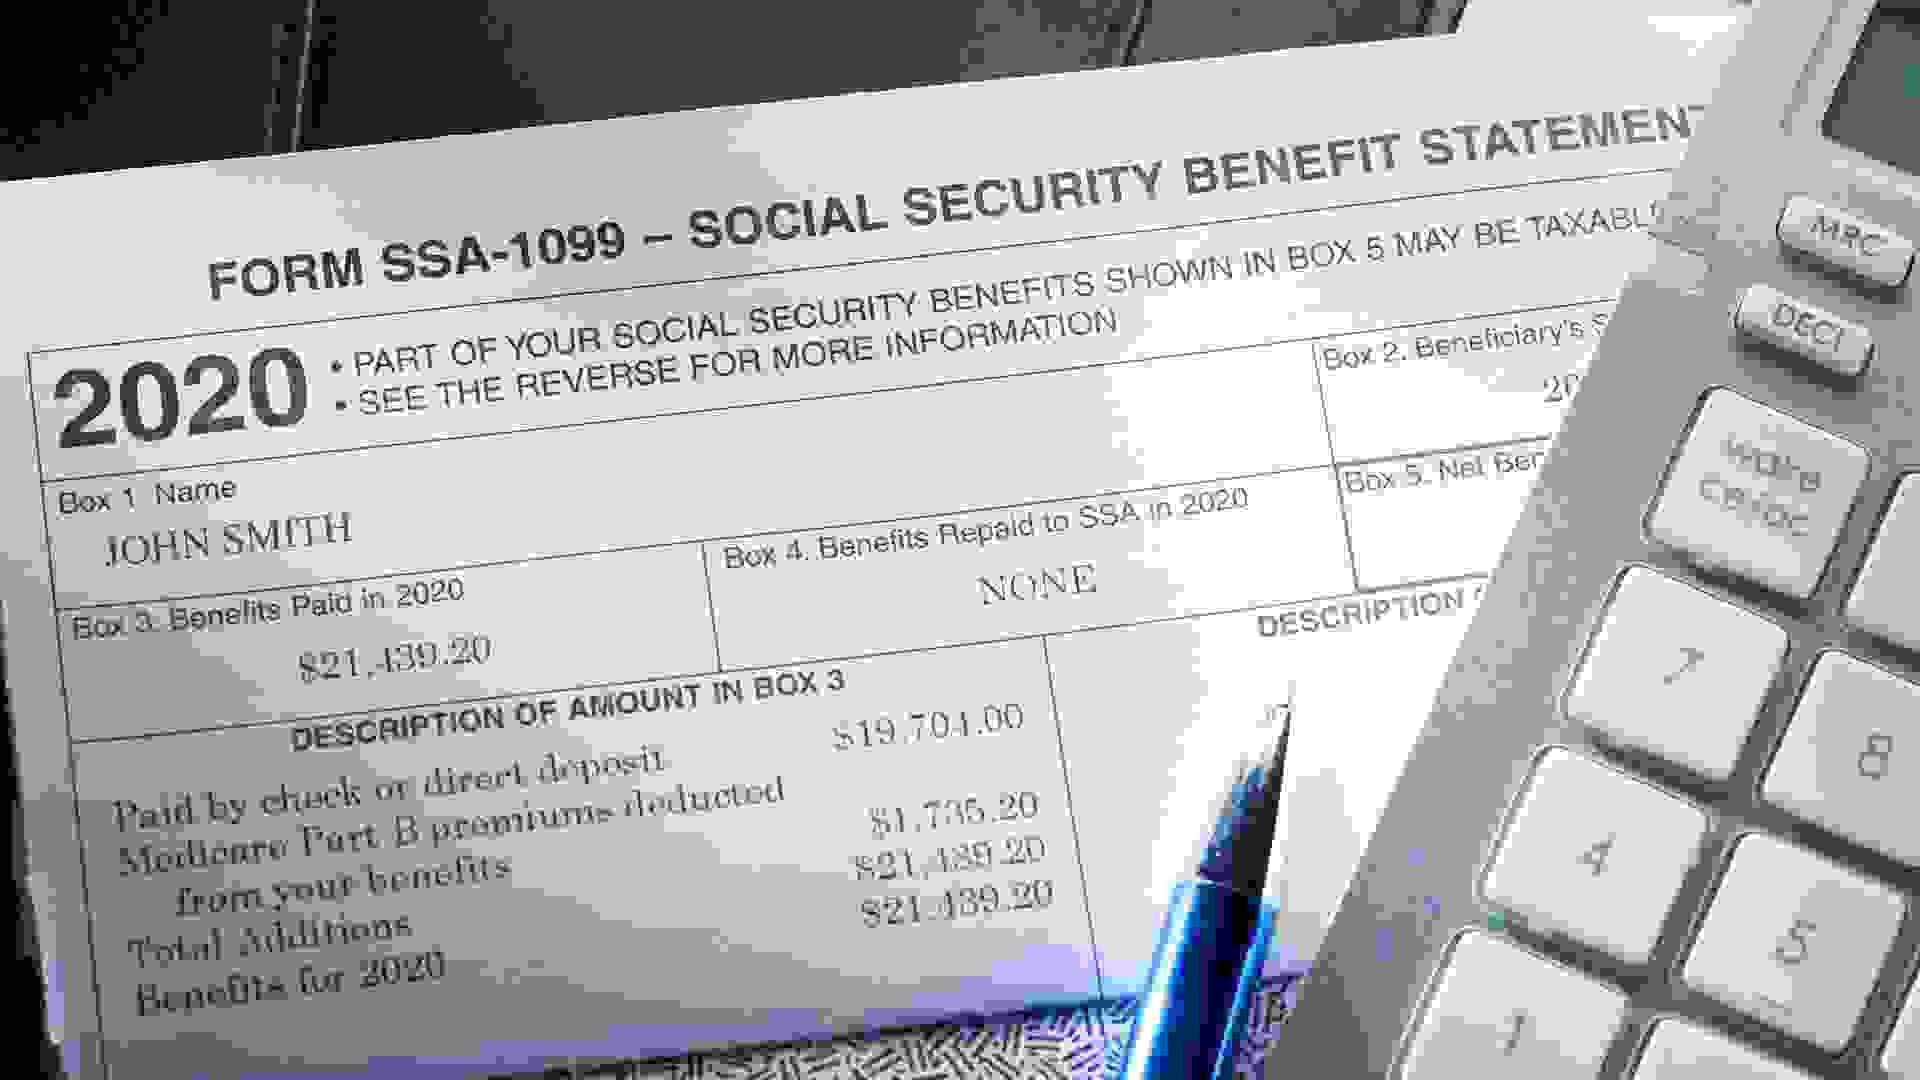 2020 Social Security Benefit Statement with calculator.